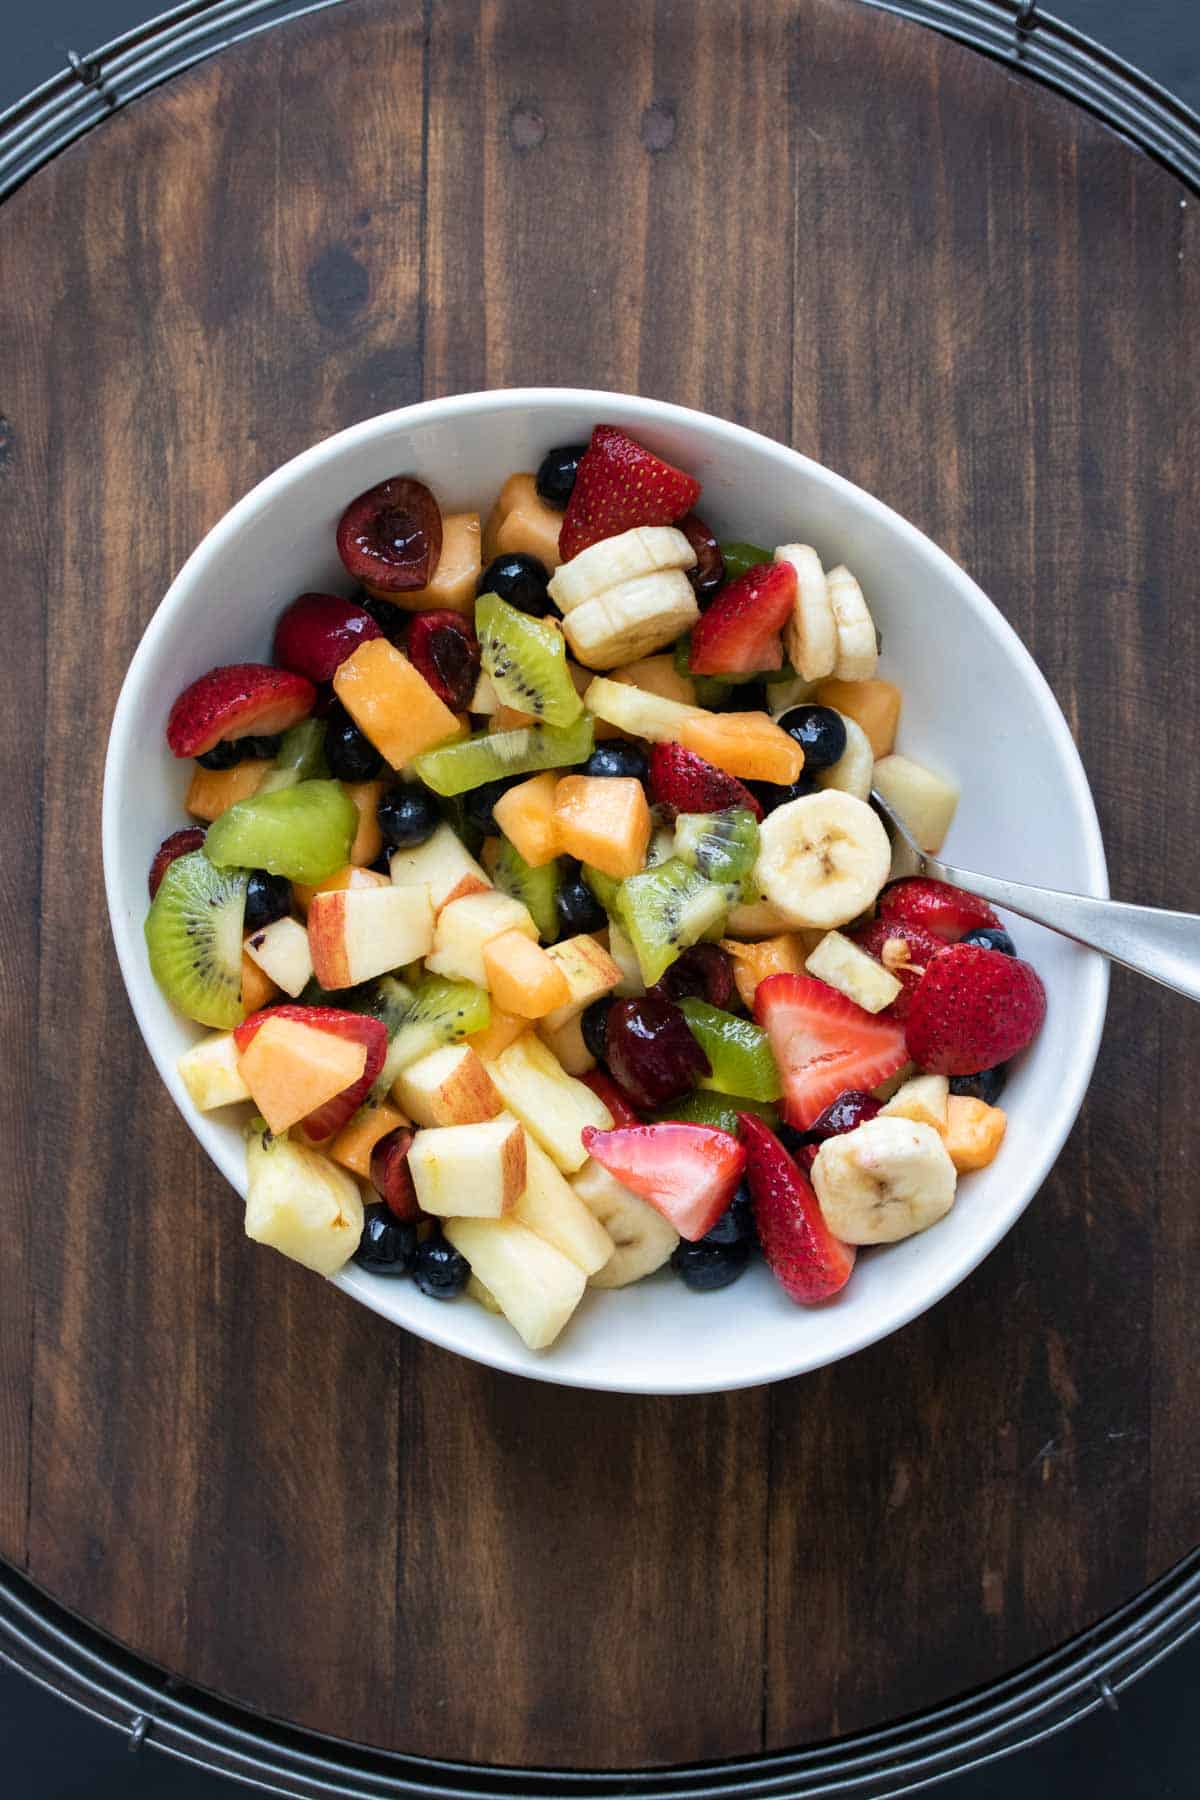 Variety of cut up fruit in a white bowl